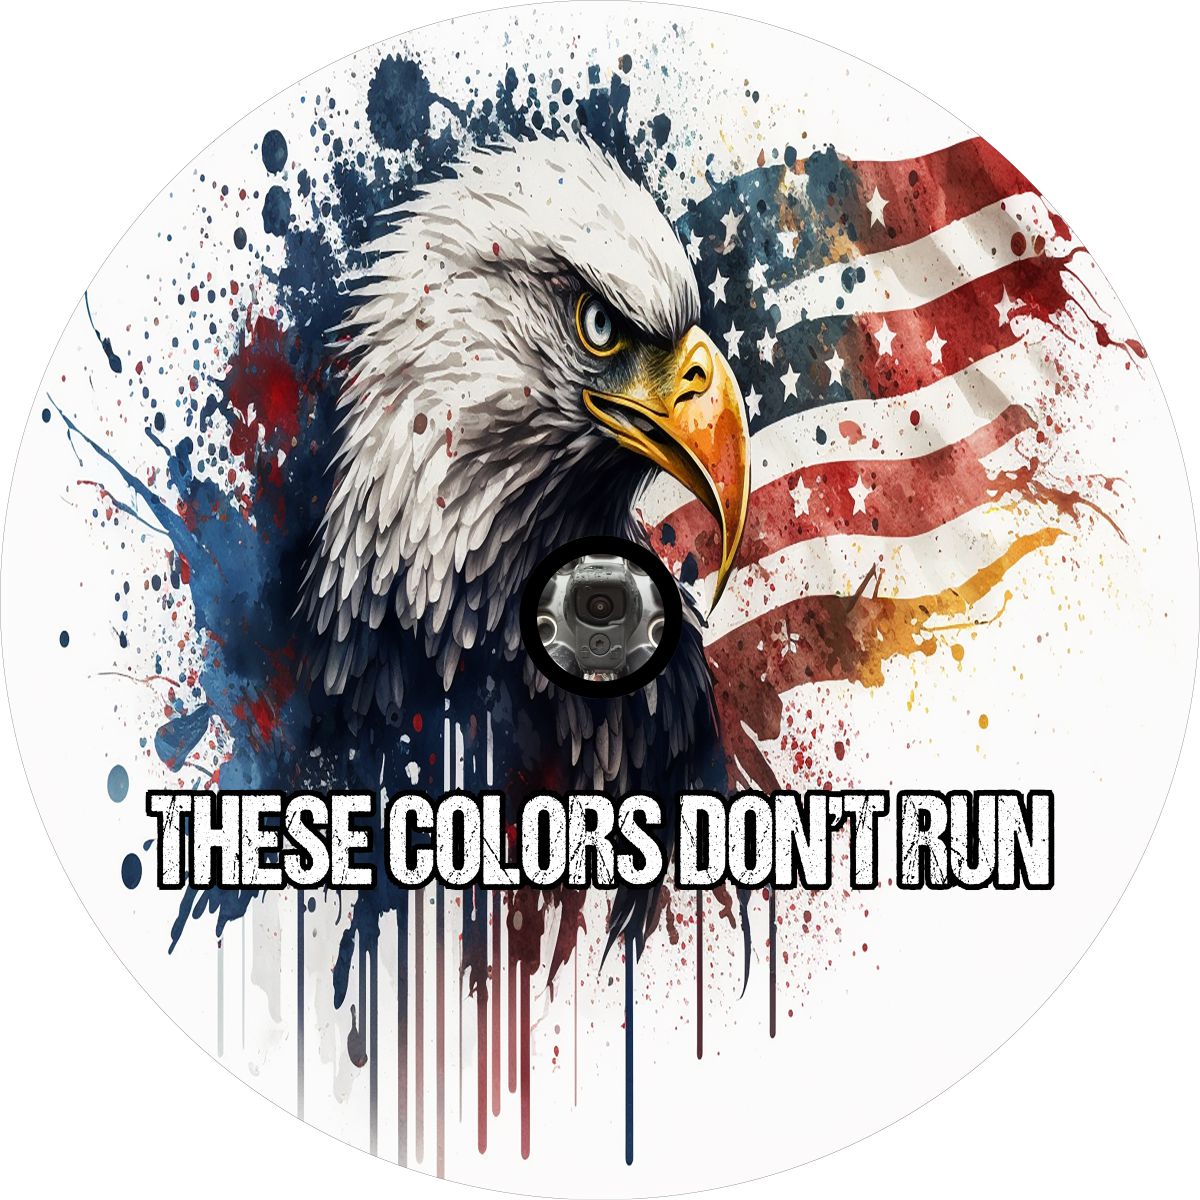 Cool spare tire cover design of a paint splattered American flag, bald eagle and saying, "these colors don't run." Design has a space sewn in to accommodate and backup camera.